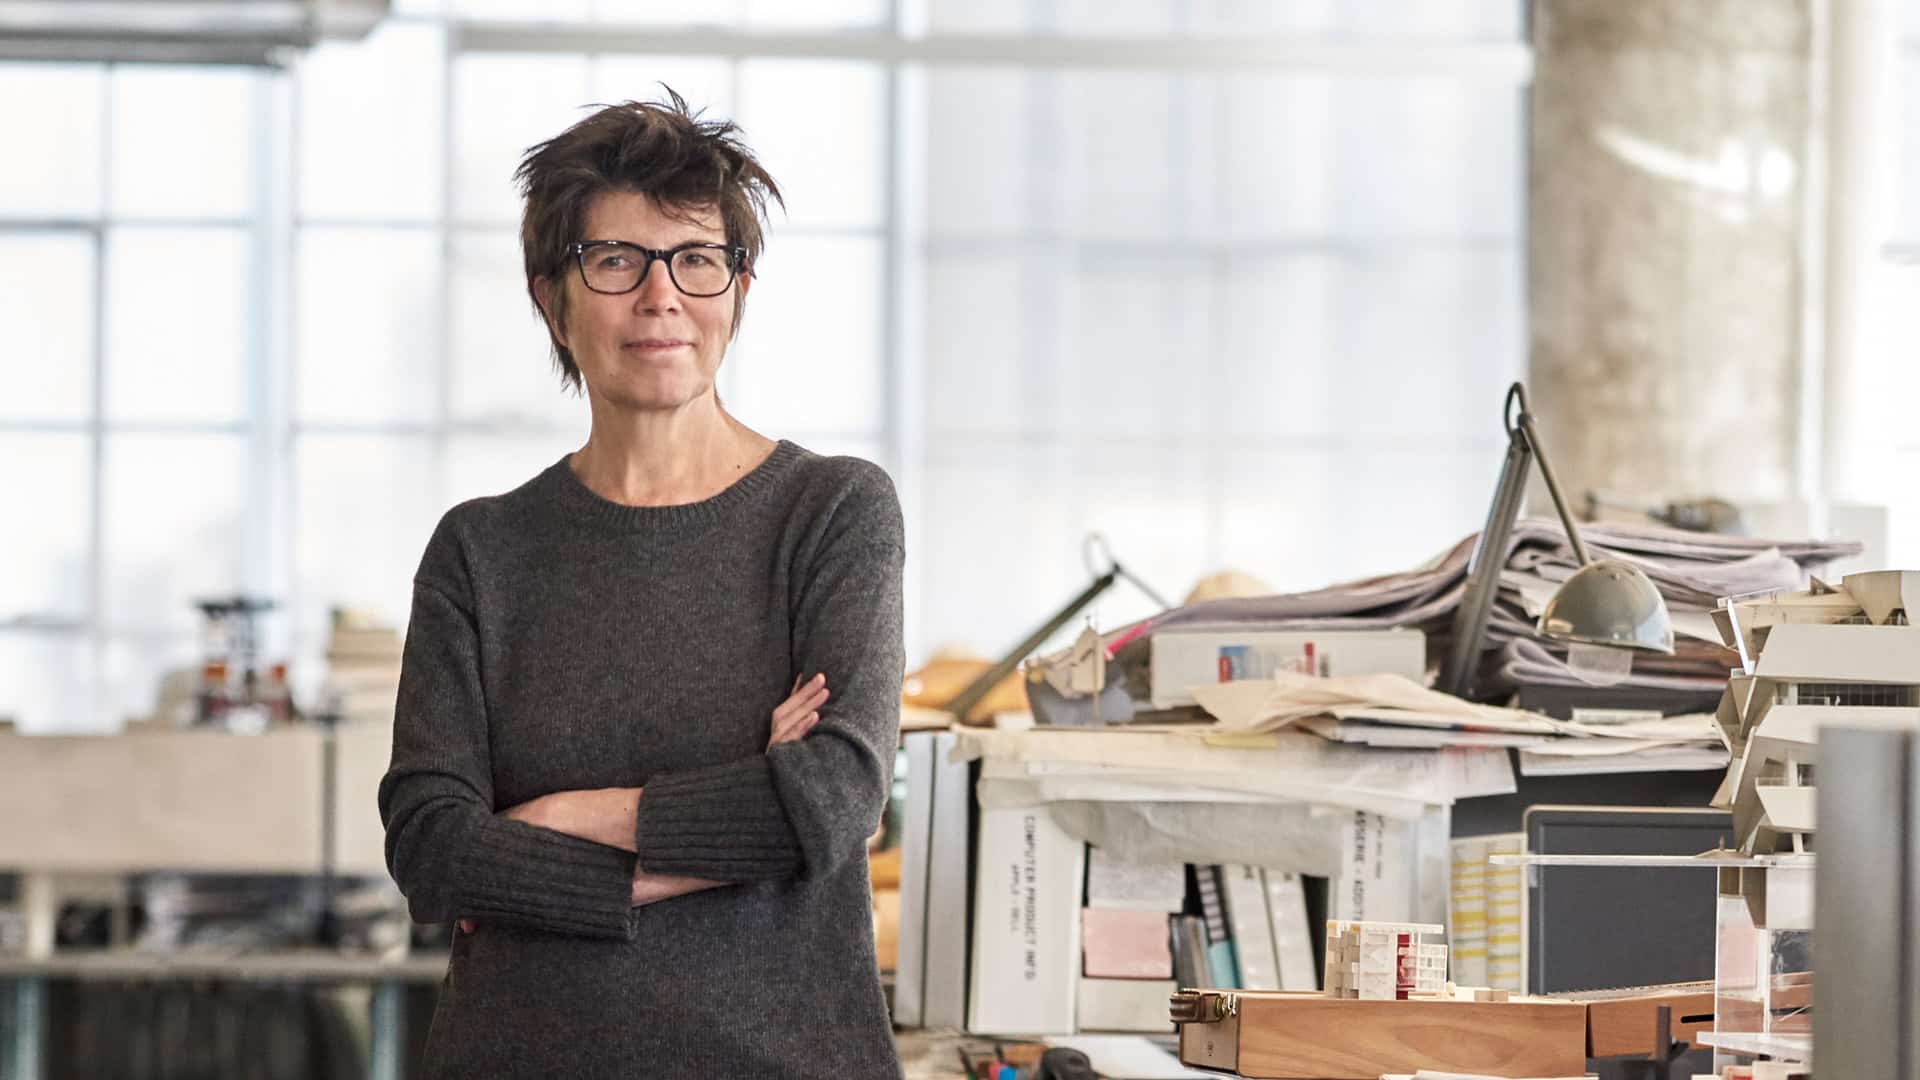 Liz Diller: Making Space for the Future